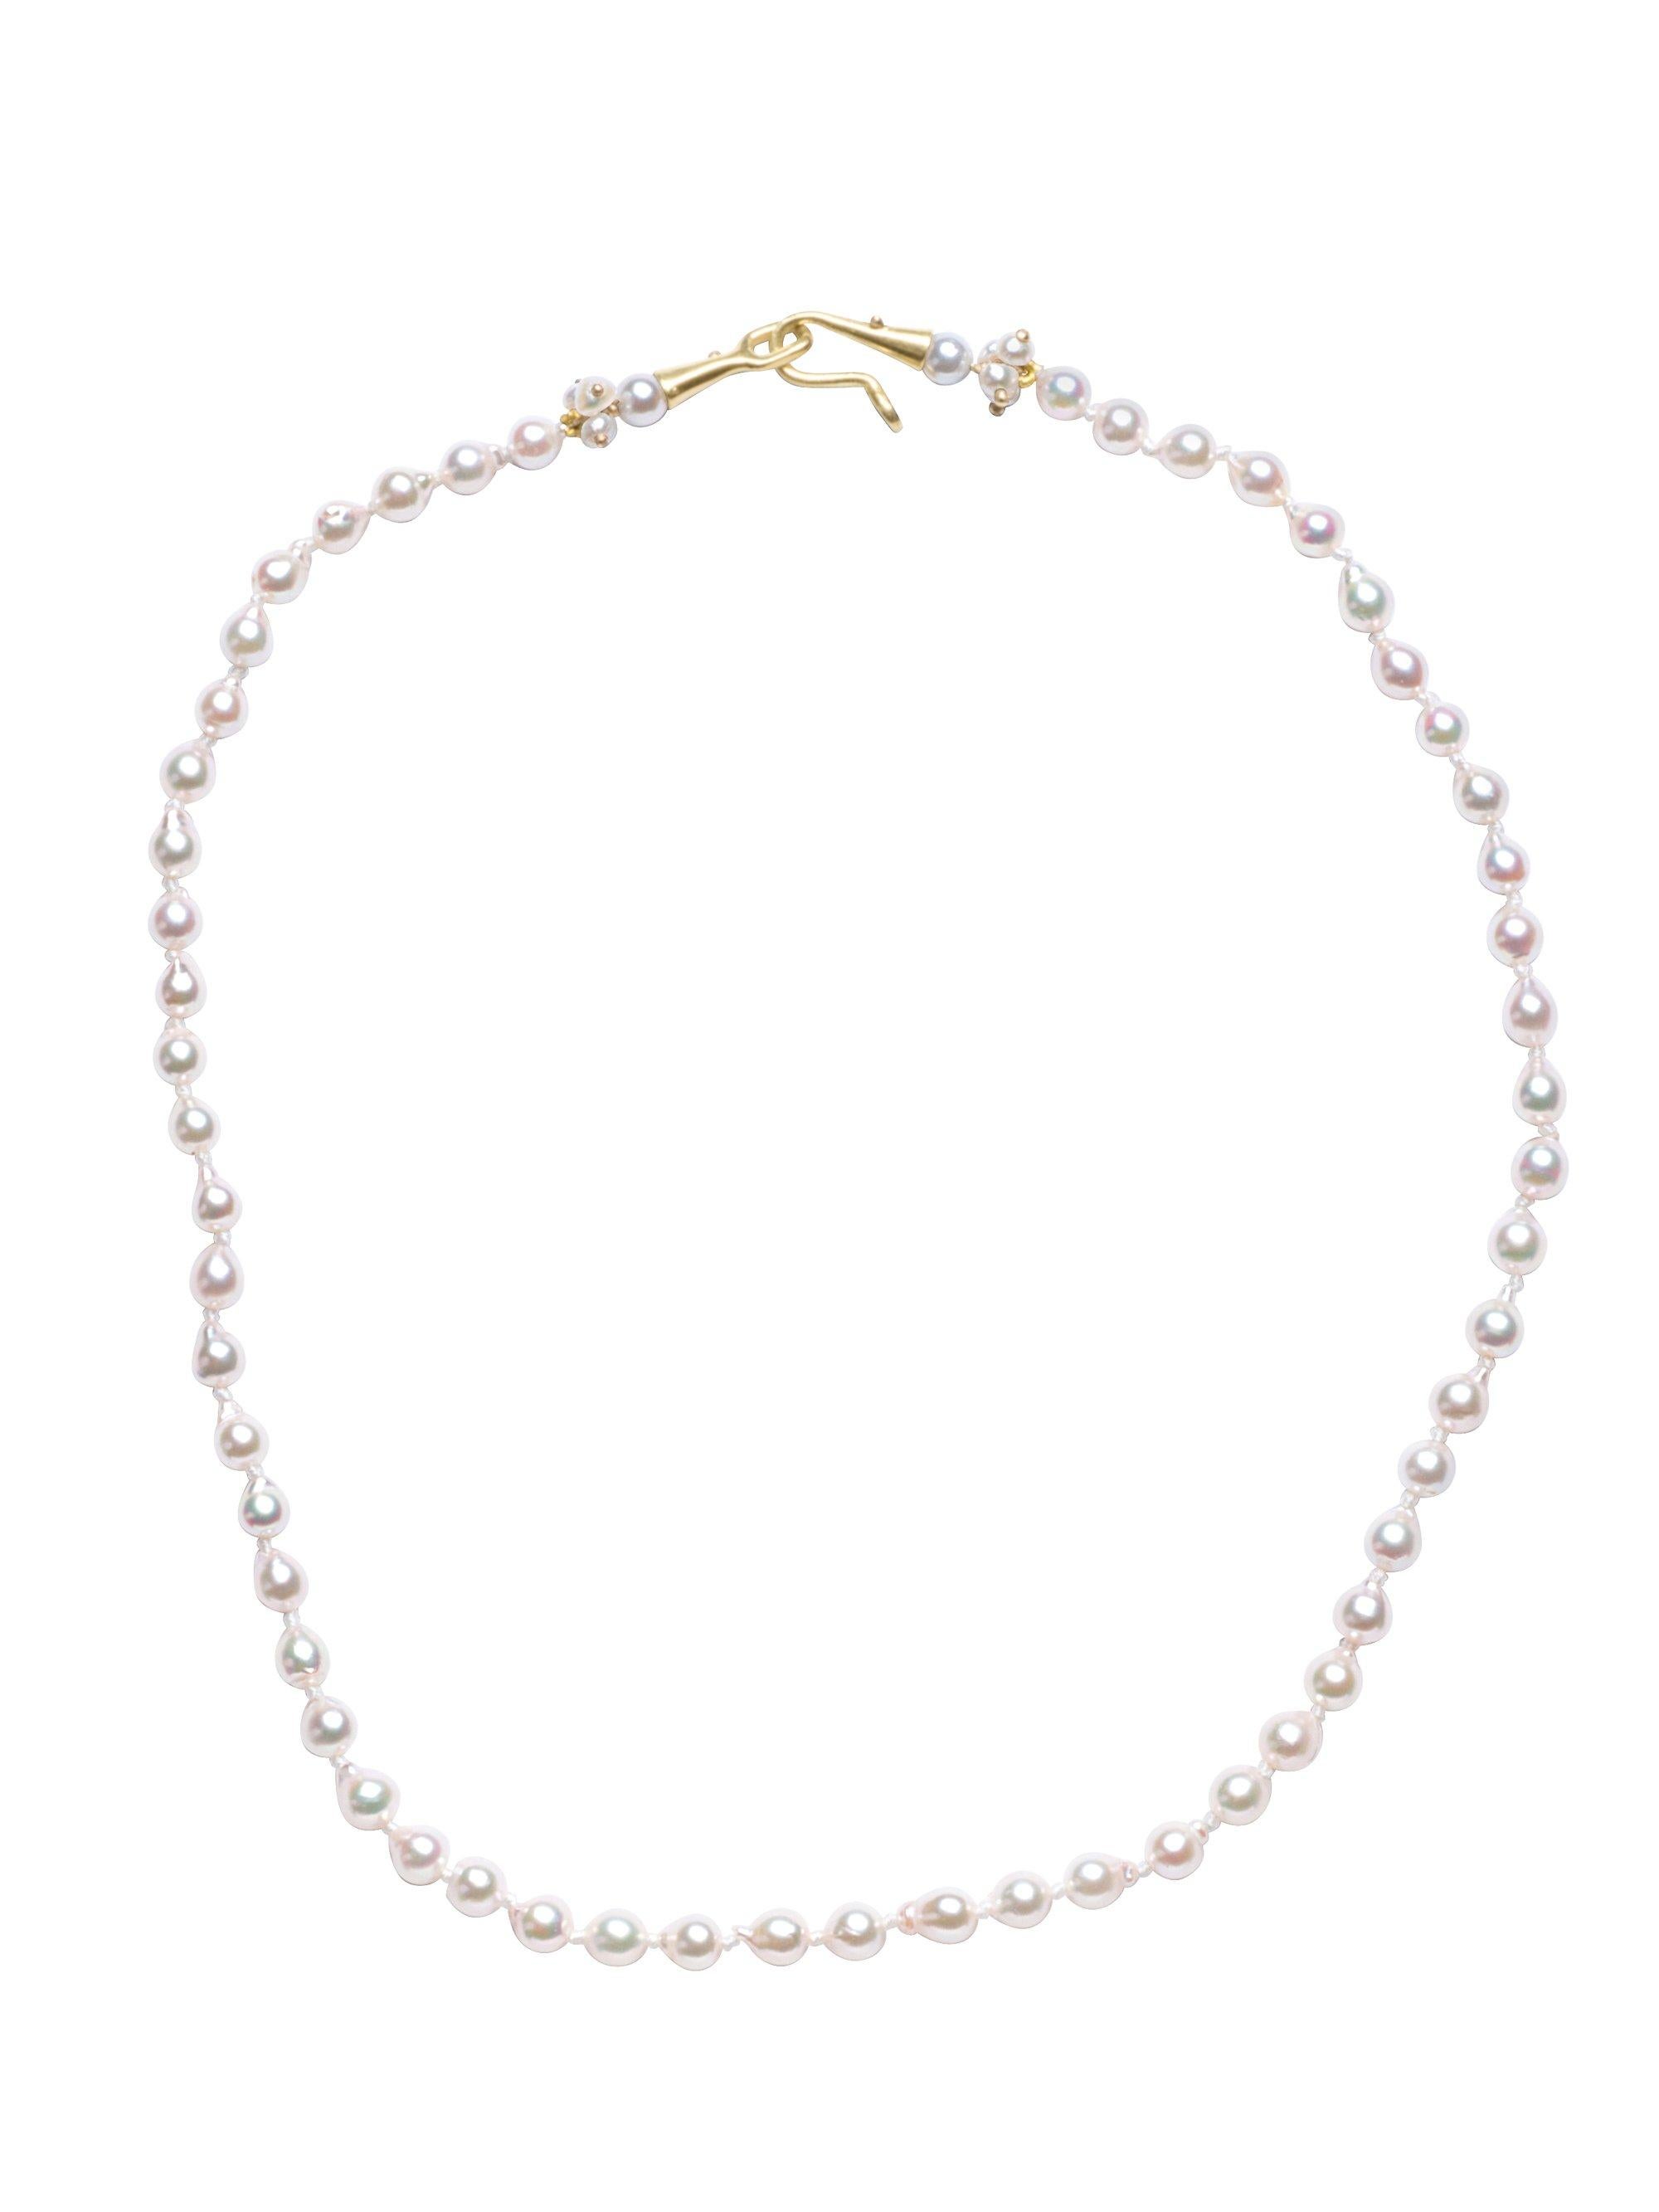 4-5mm super lustrous white Japanese baby baroque pearls on Gabrielle's signature 18k baby cone hook & eye 16”